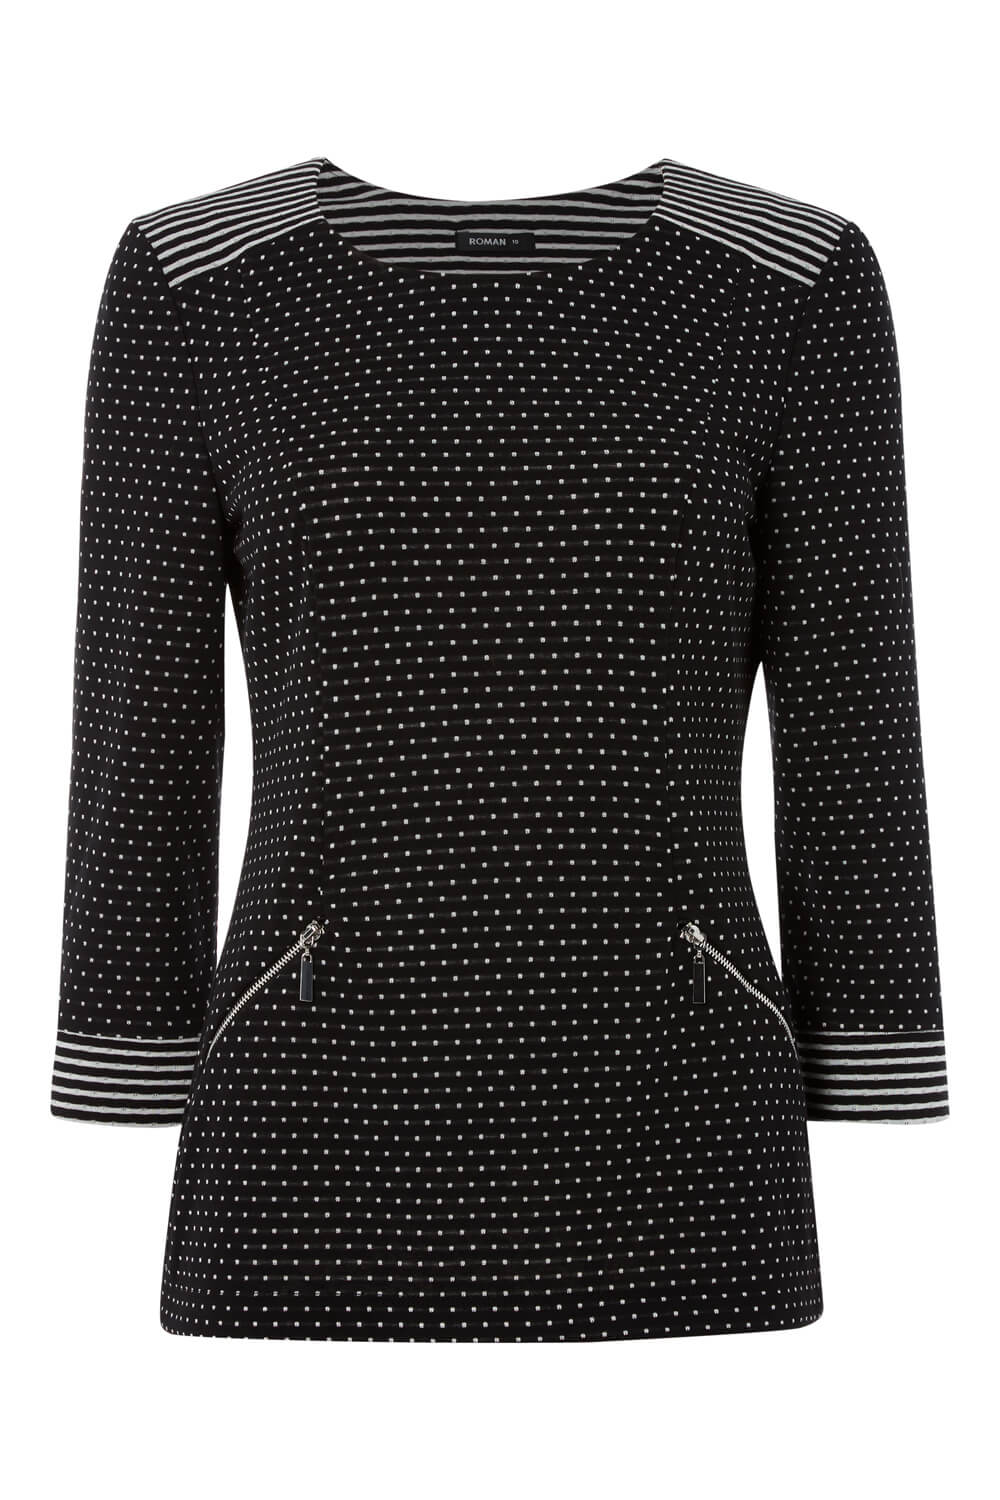 Black Contrast Spot and Stripe Zip Top, Image 4 of 4